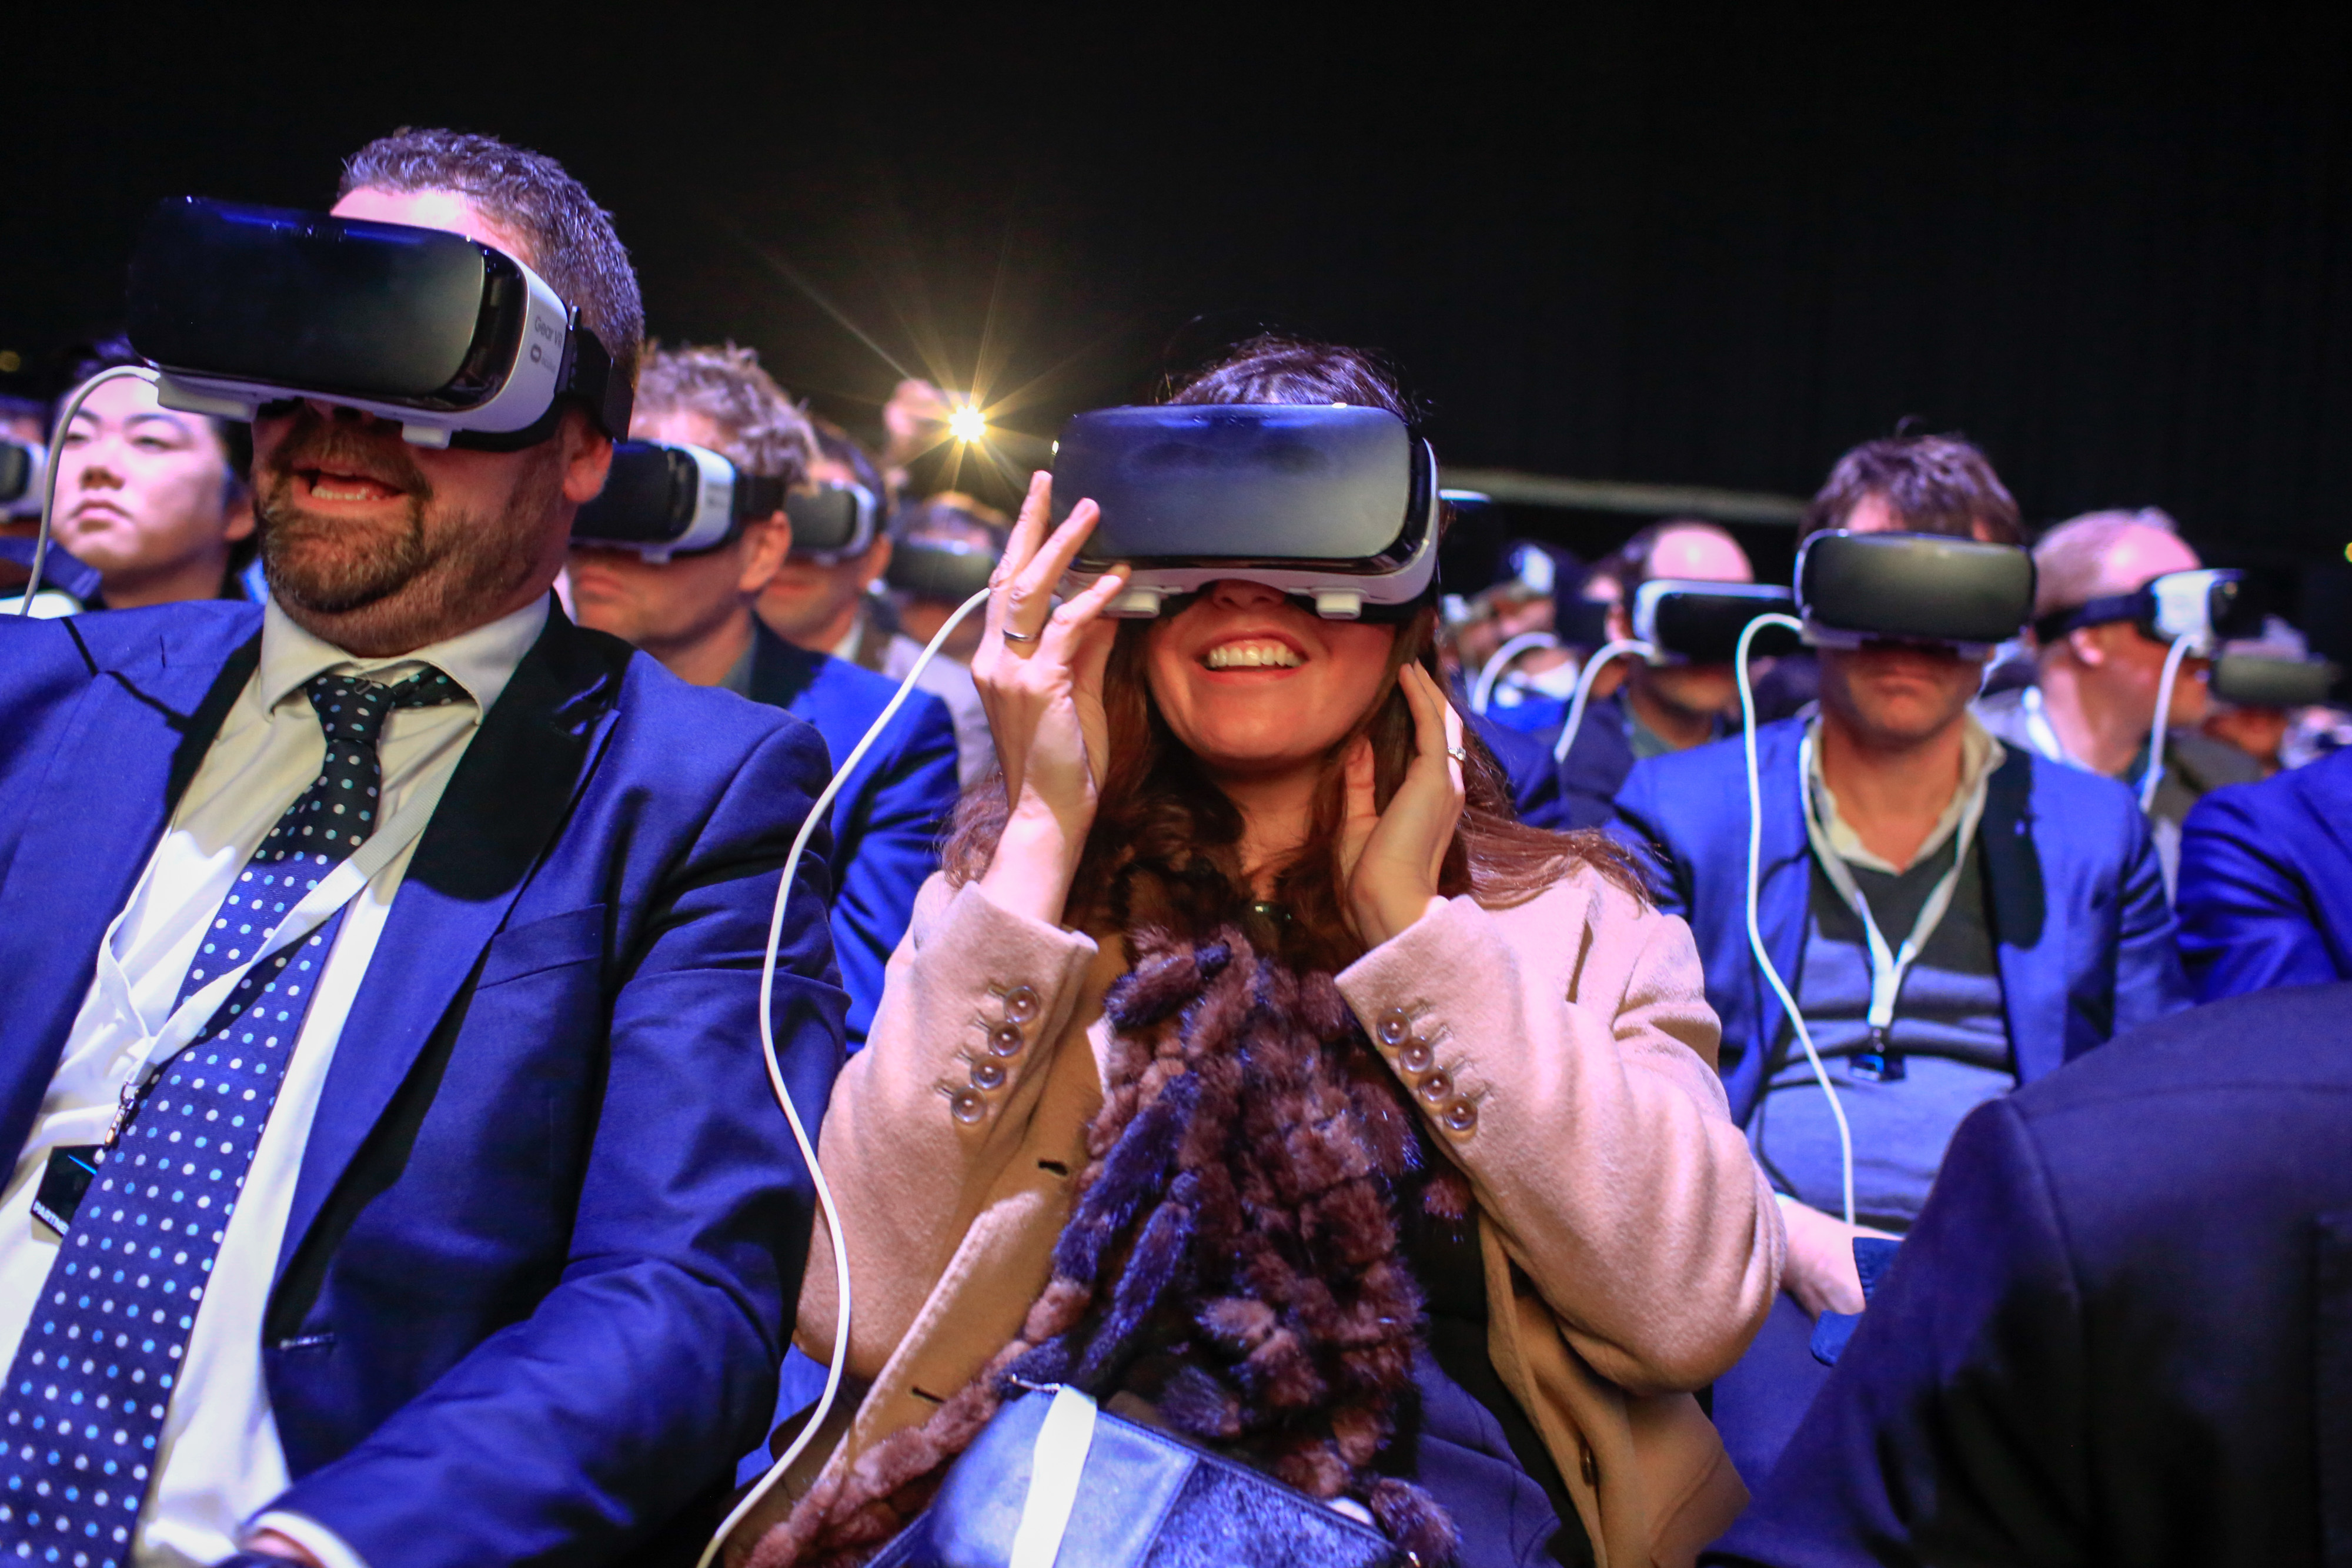 Delegates use the Gear VR (virtual reality) headset, manufactured by Samsung Electronics Co., at the Samsung Unpacked launch event ahead of the Mobile World Congress in Barcelona, Spain, on Sunday, Feb. 21, 2016. (Bloomberg&mdash;Bloomberg via Getty Images)